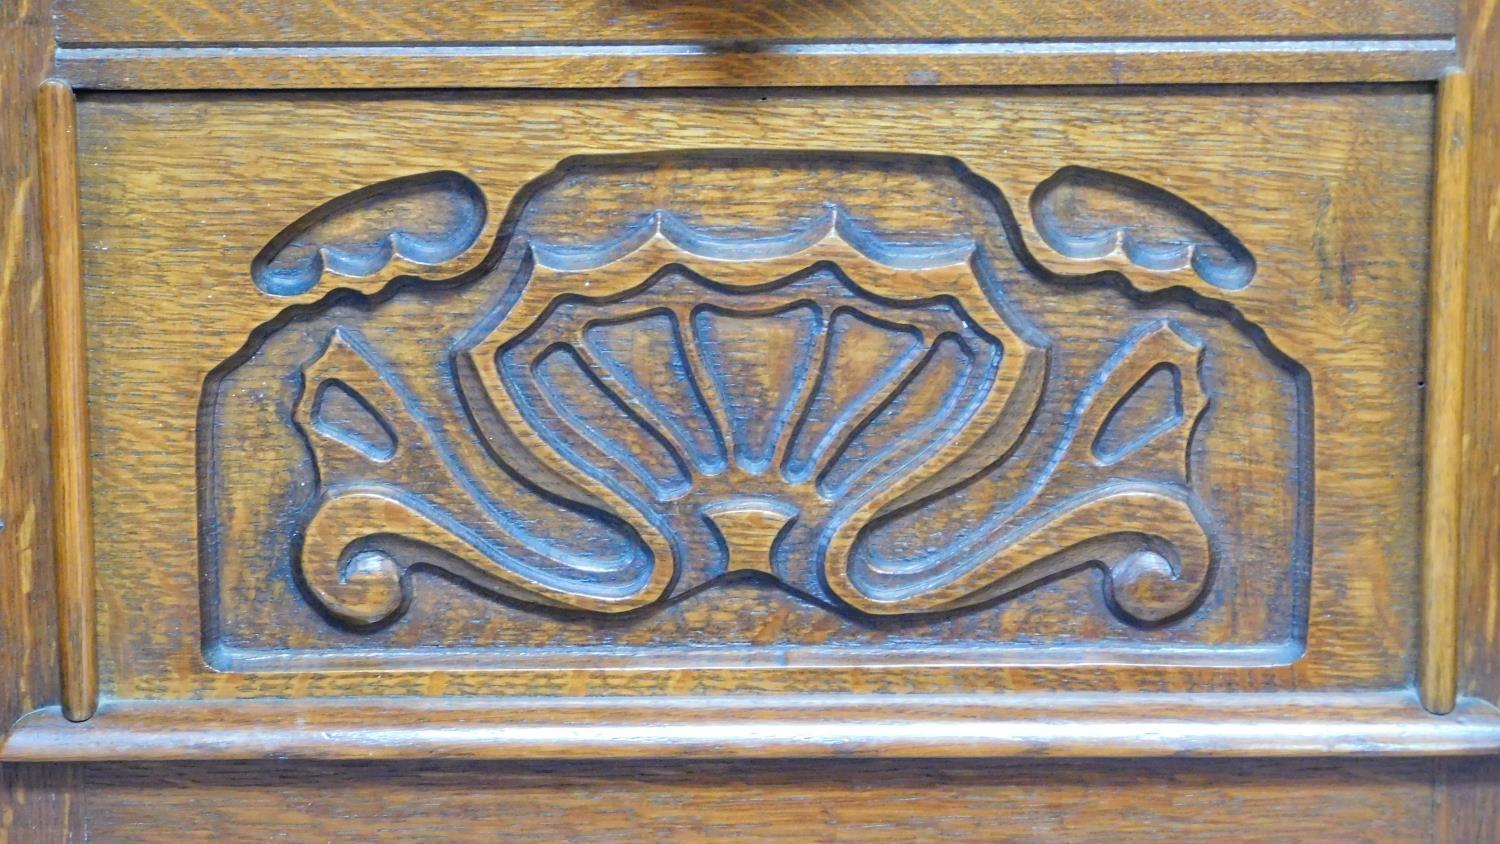 A mid 20th century Continental carved oak sideboard decorated with animal and scroll work - Image 8 of 11